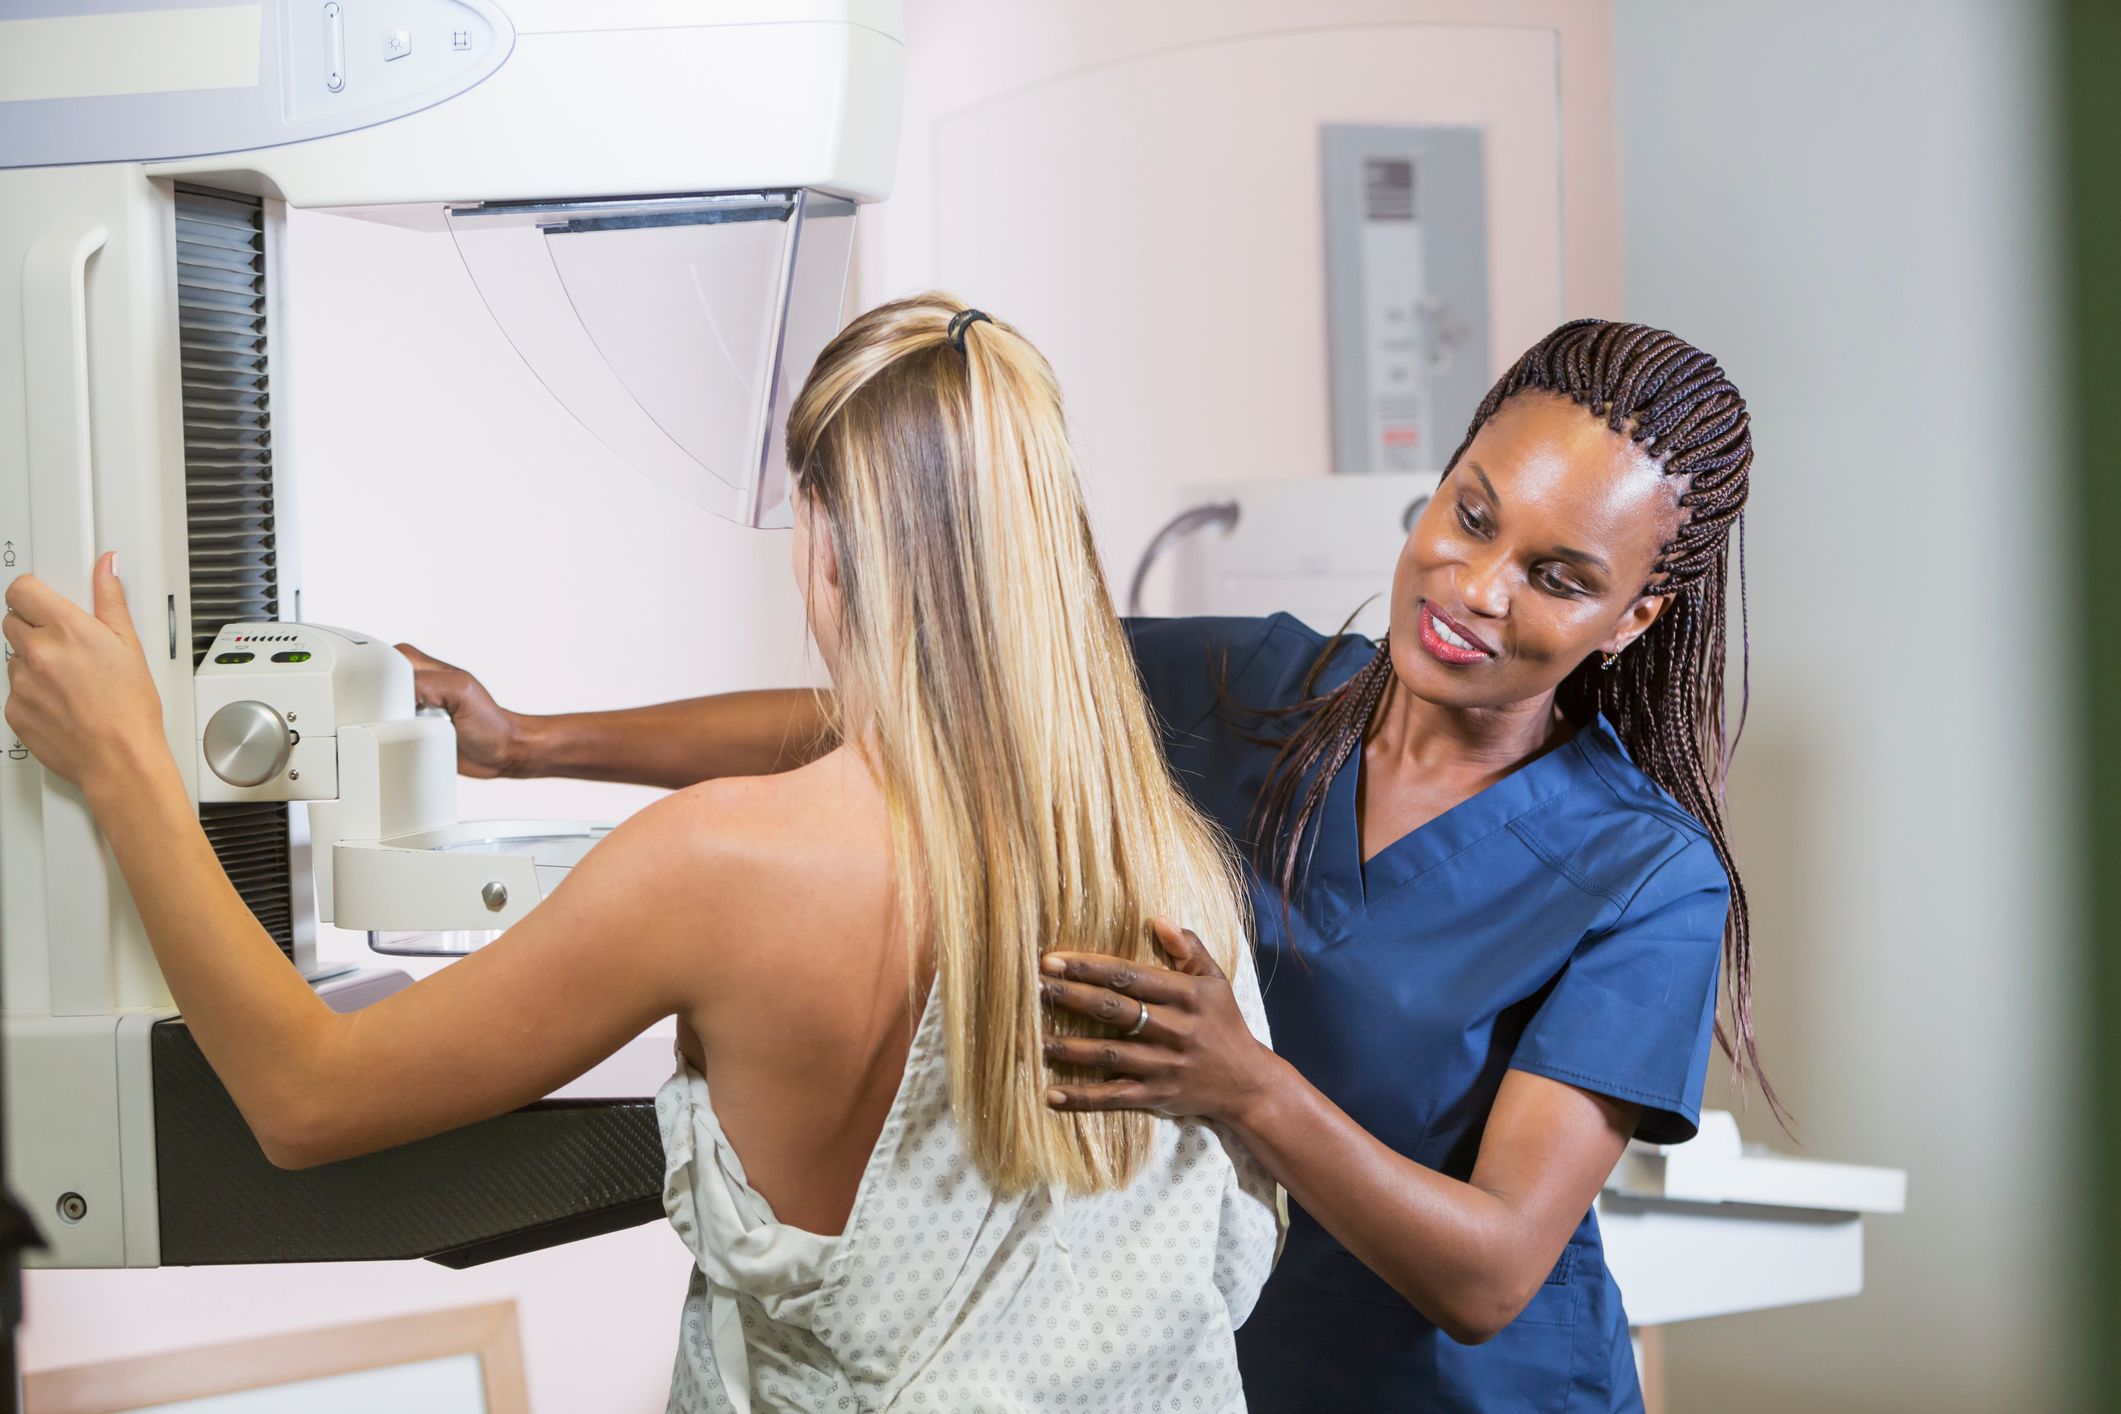 3 Facts You Need to Know About Breast Cancer Screening